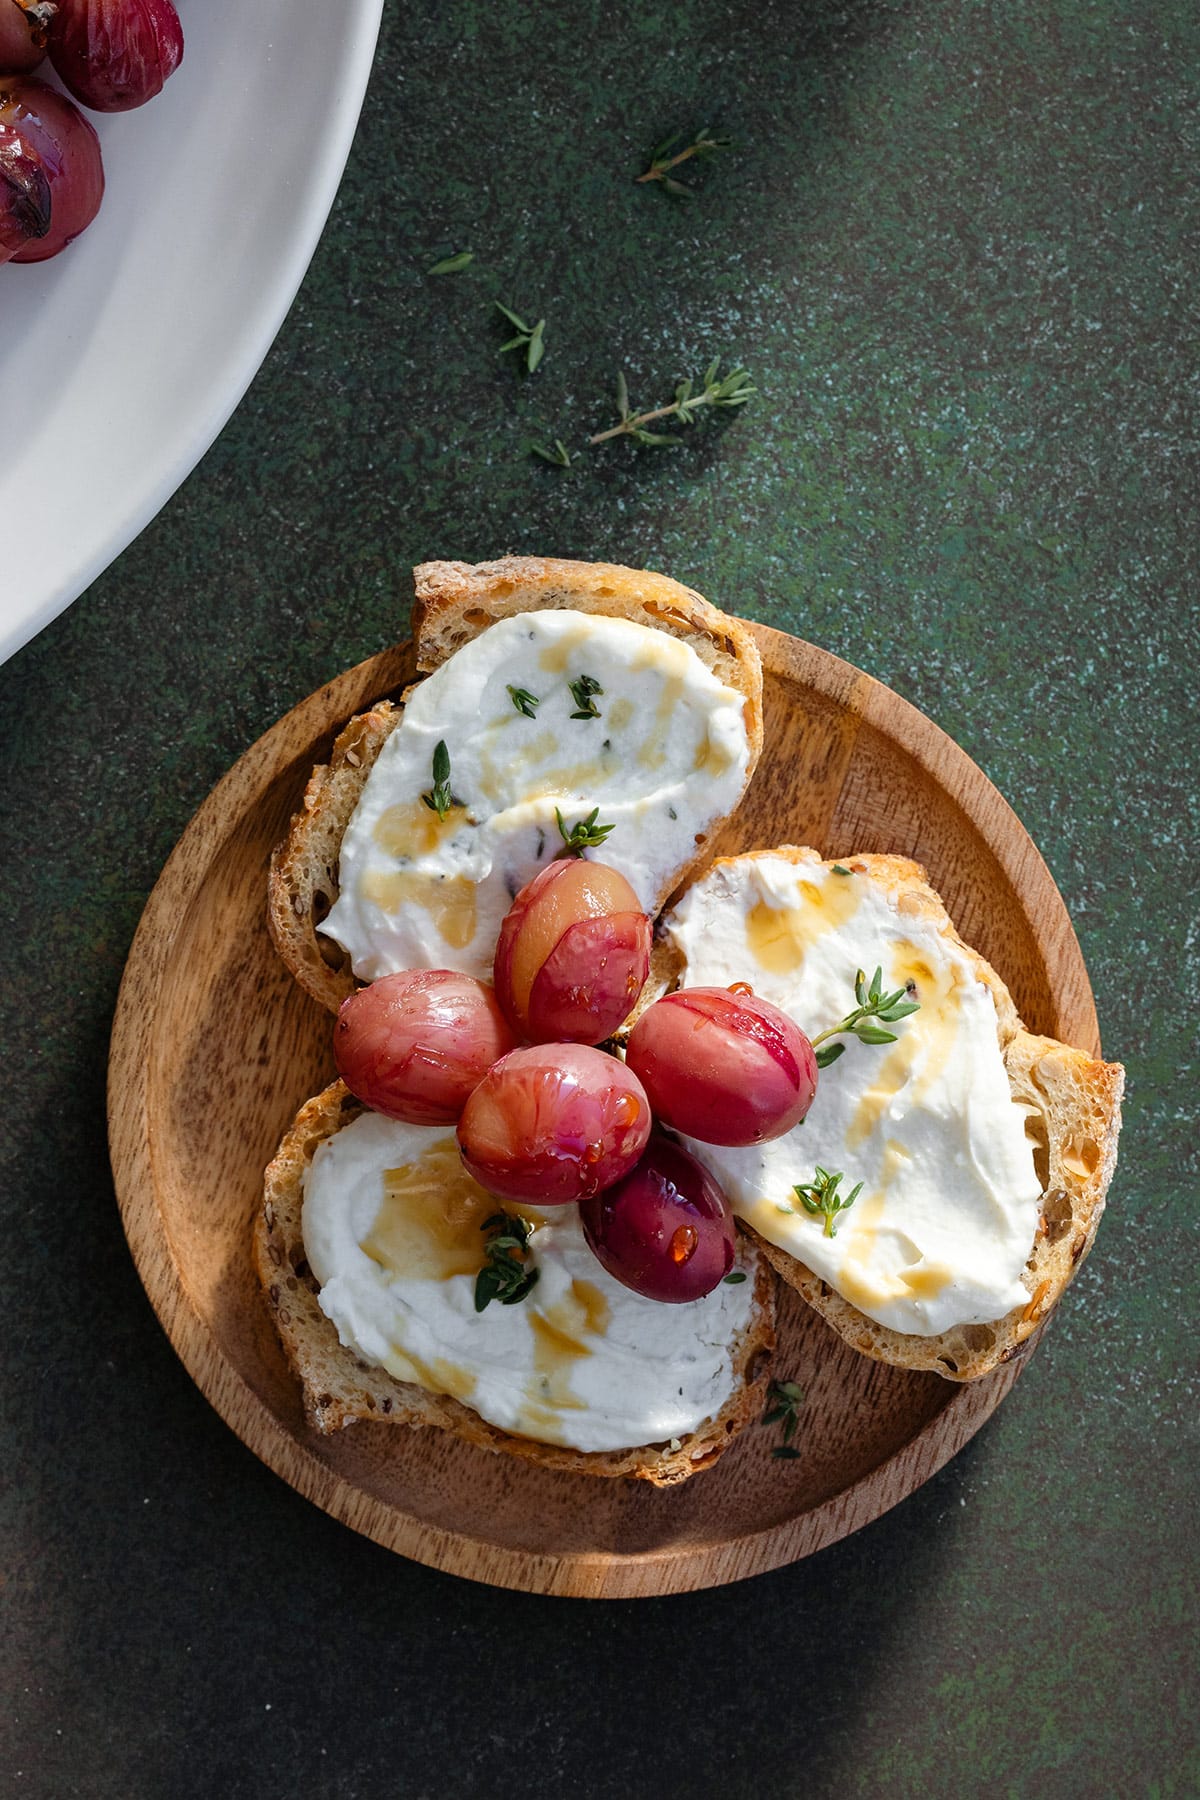 Crostini on a small wooden plate topped with goat cheese and grapes.